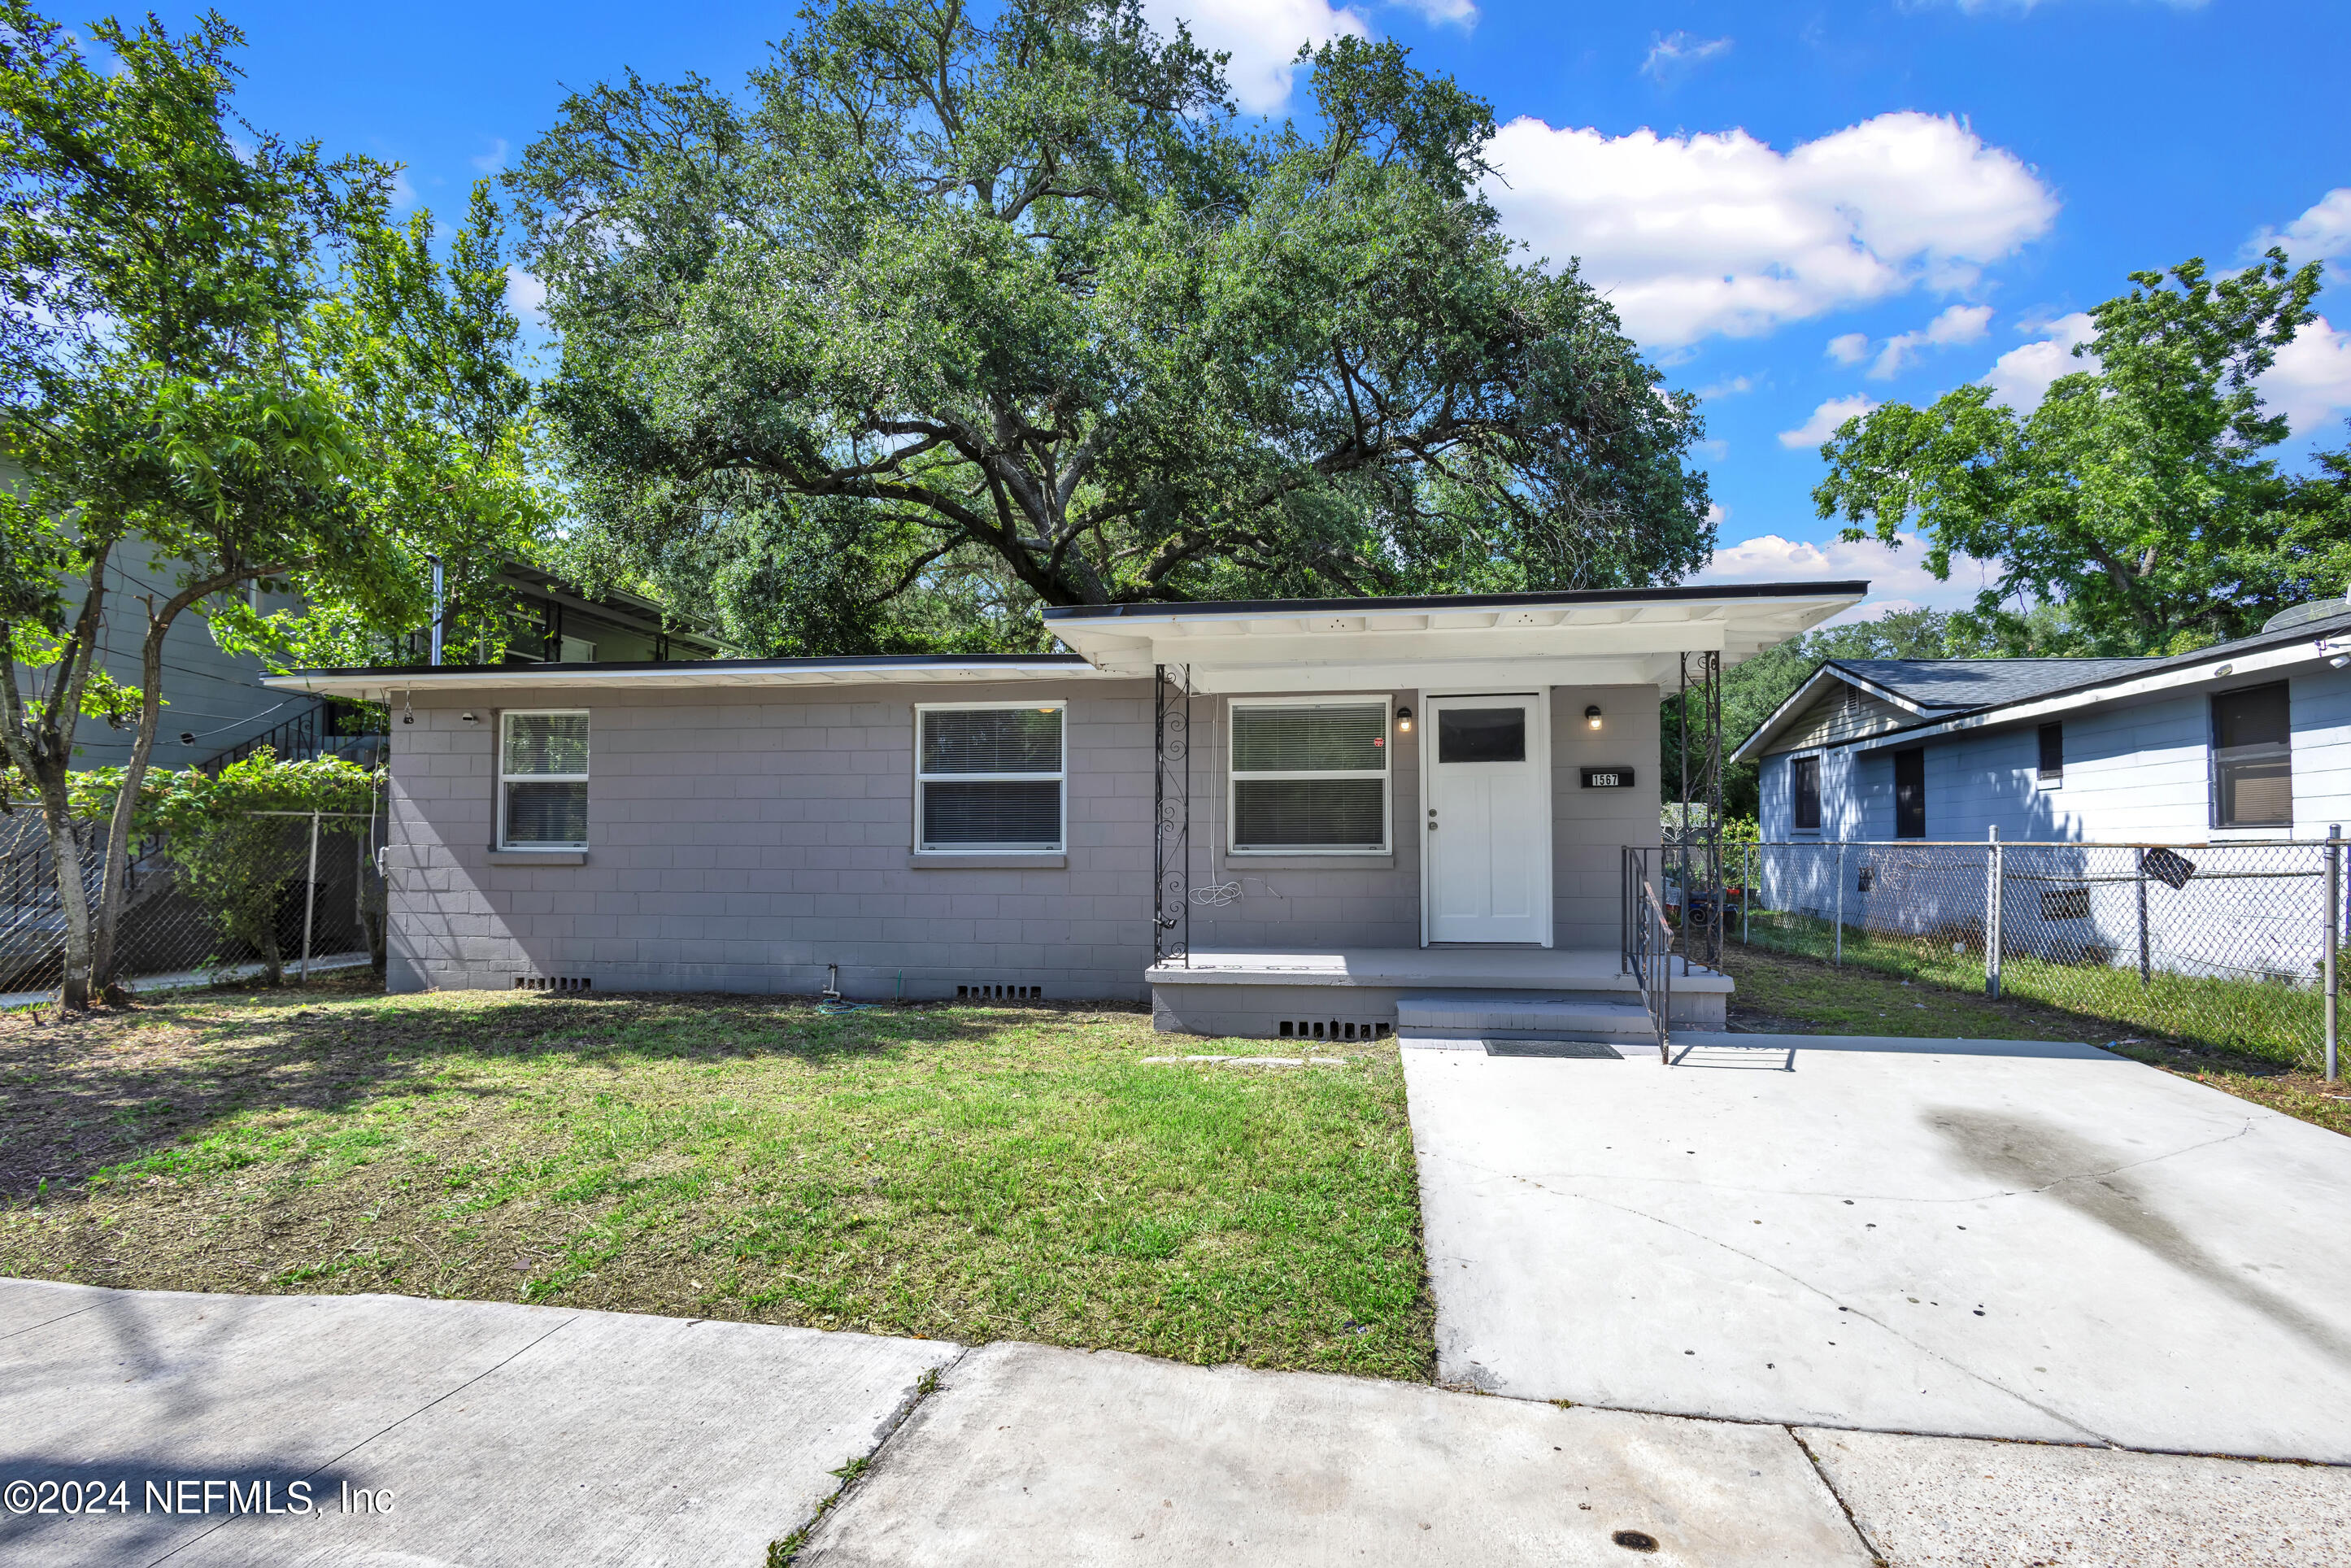 Jacksonville, FL home for sale located at 1567 W 19th Street, Jacksonville, FL 32209